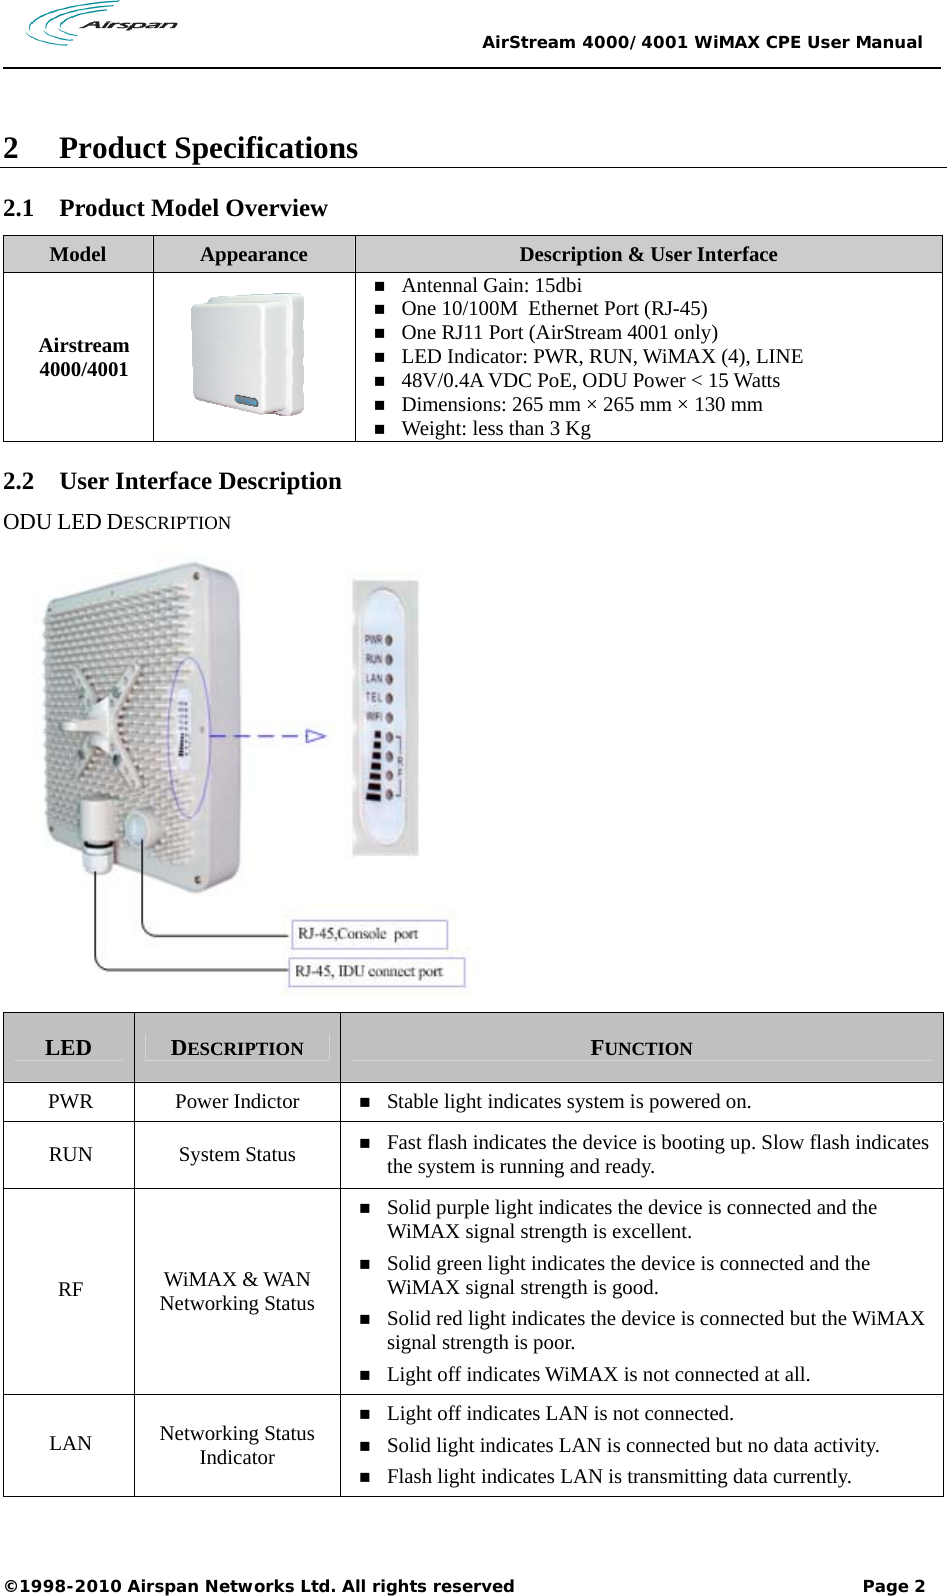                                                 AirStream 4000/4001 WiMAX CPE User Manual ©1998-2010 Airspan Networks Ltd. All rights reserved                                                             Page 2   2 Product Specifications 2.1 Product Model Overview Model  Appearance  Description &amp; User Interface Airstream 4000/4001   Antennal Gain: 15dbi   One 10/100M  Ethernet Port (RJ-45)  One RJ11 Port (AirStream 4001 only)  LED Indicator: PWR, RUN, WiMAX (4), LINE    48V/0.4A VDC PoE, ODU Power &lt; 15 Watts  Dimensions: 265 mm × 265 mm × 130 mm  Weight: less than 3 Kg 2.2 User Interface Description  ODU LED DESCRIPTION    LED  DESCRIPTION  FUNCTION PWR Power Indictor  Stable light indicates system is powered on. RUN System Status  Fast flash indicates the device is booting up. Slow flash indicates the system is running and ready. RF  WiMAX &amp; WAN Networking Status  Solid purple light indicates the device is connected and the WiMAX signal strength is excellent.   Solid green light indicates the device is connected and the WiMAX signal strength is good.   Solid red light indicates the device is connected but the WiMAX signal strength is poor.   Light off indicates WiMAX is not connected at all. LAN  Networking Status Indicator  Light off indicates LAN is not connected.  Solid light indicates LAN is connected but no data activity.  Flash light indicates LAN is transmitting data currently. 